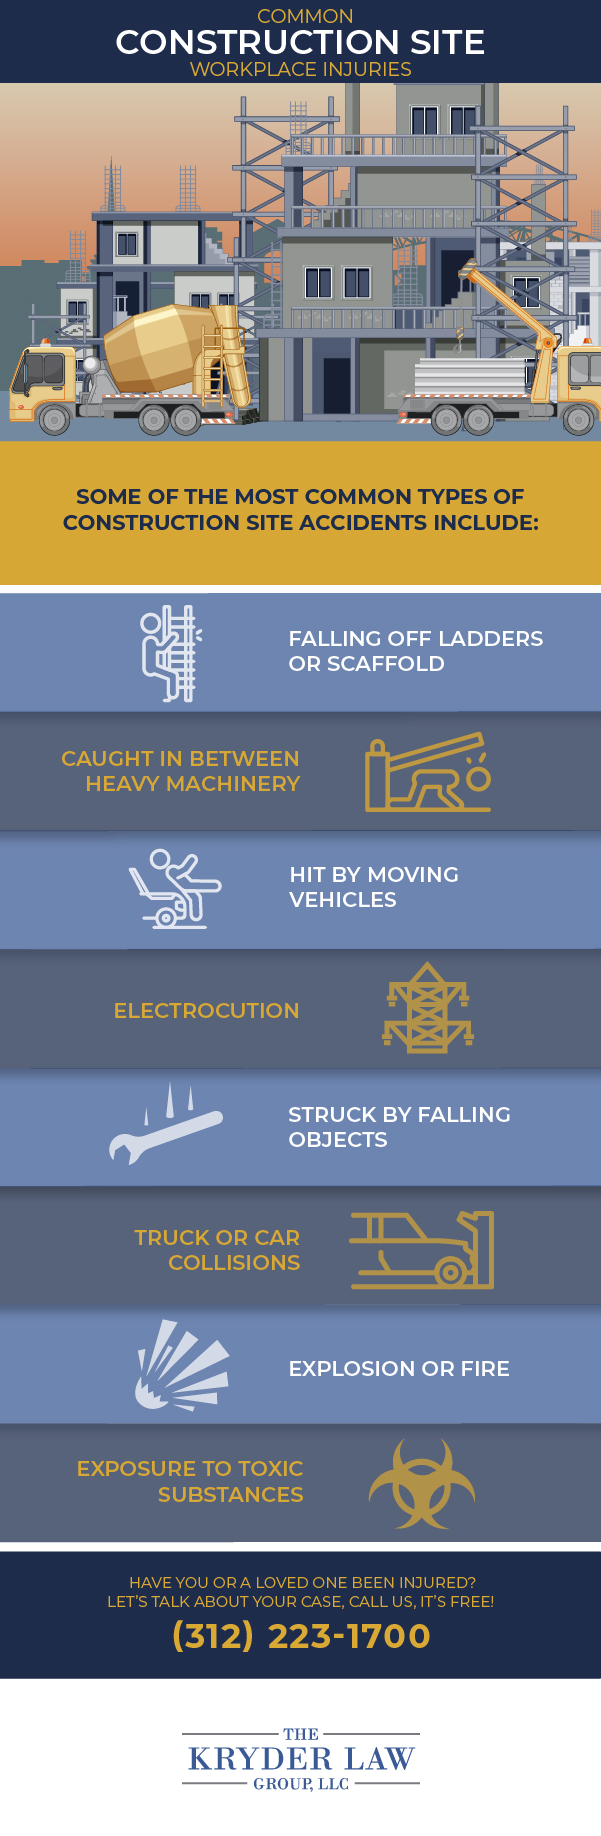 Common Construction Site Workplace Injuries